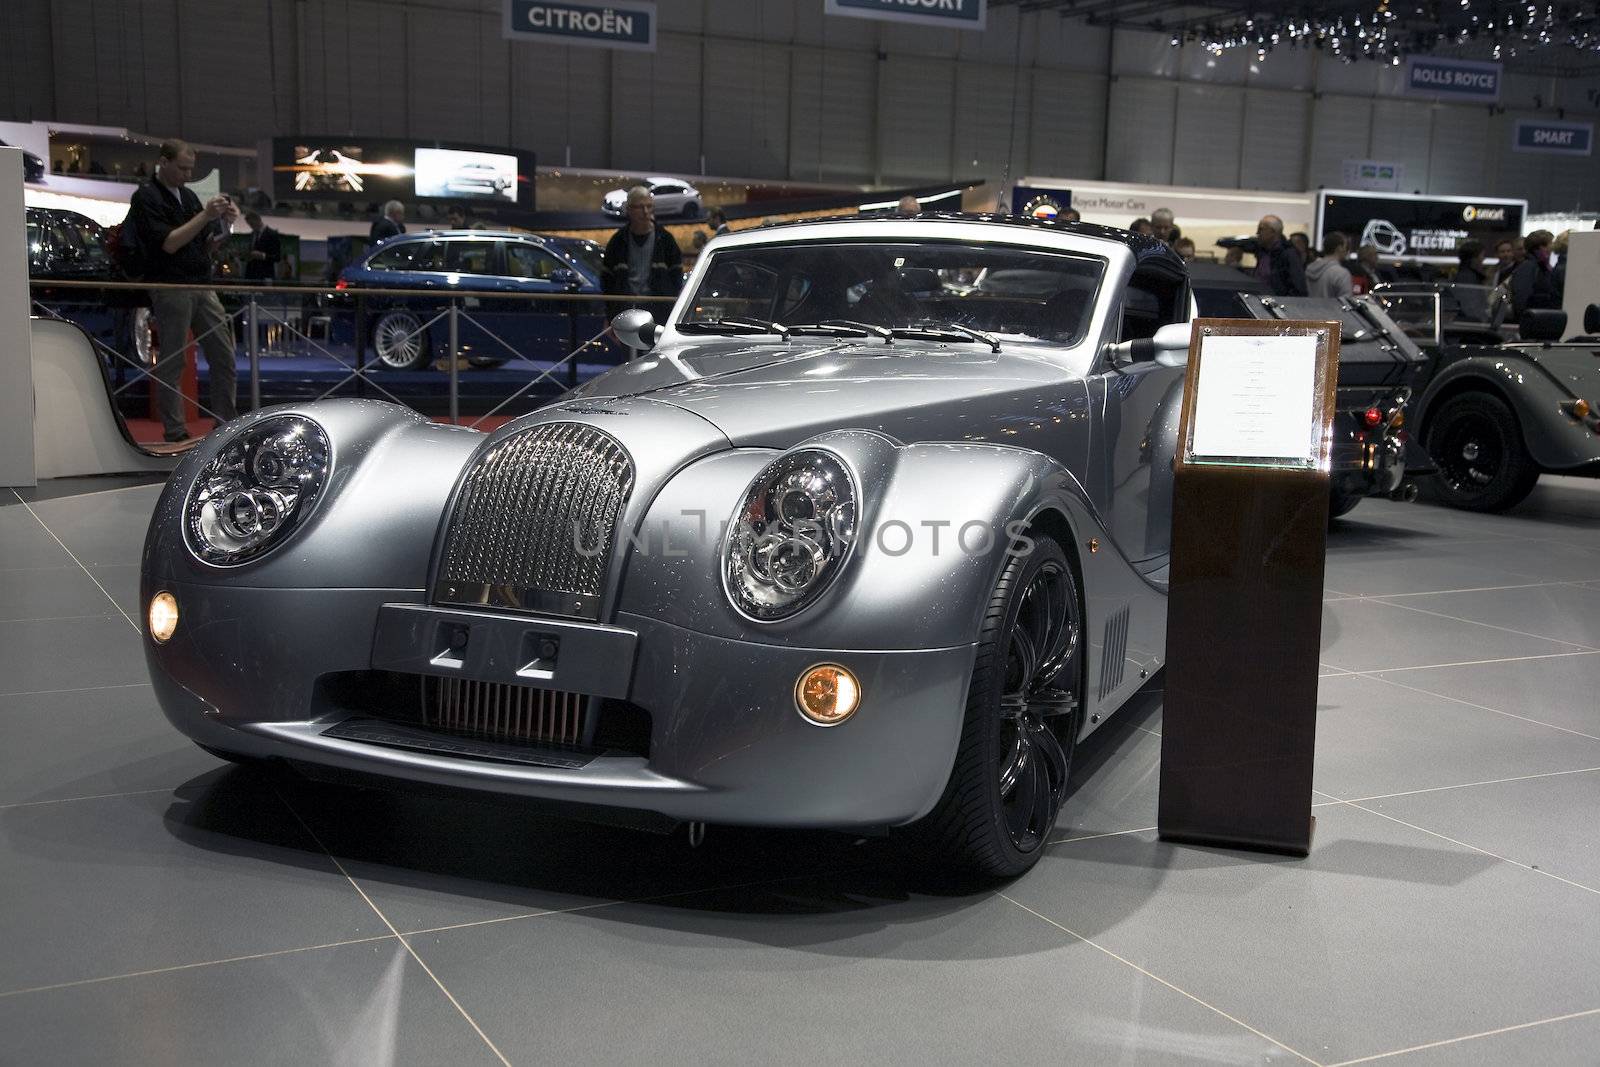 GENEVA, SWITZERLAND - MARCH 4, 2011 - Morgan Aero SuperSports is presented at the annual motor show in Geneva on March 4, 2011.